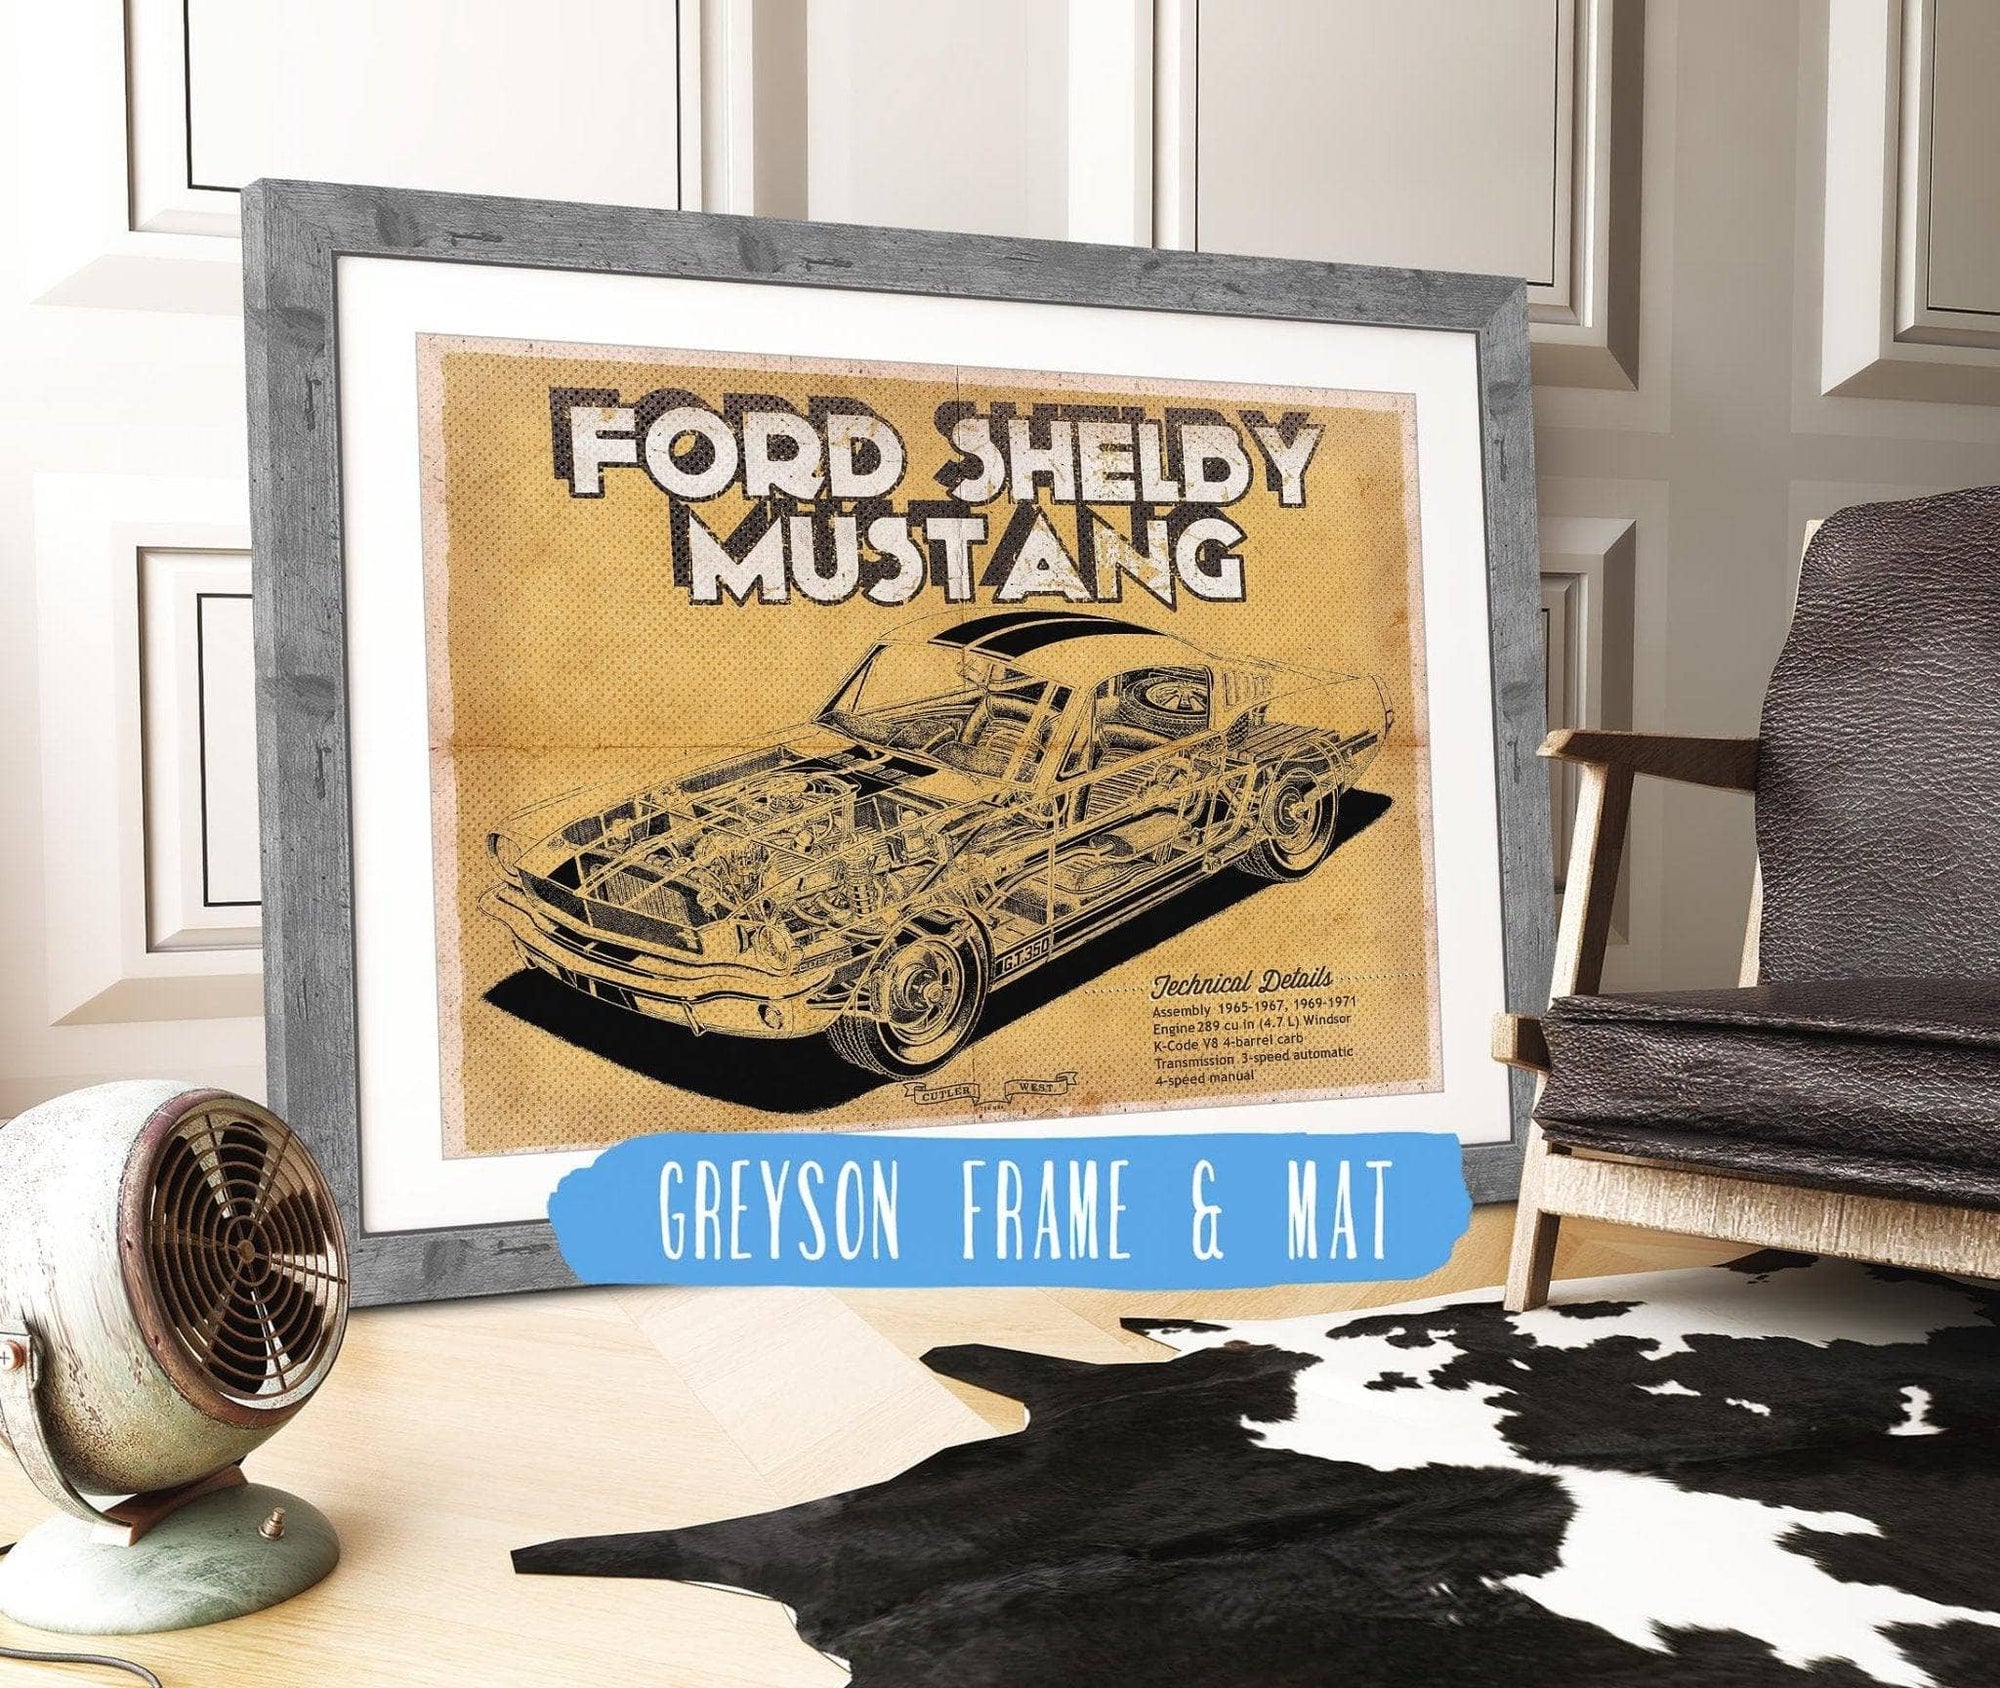 Cutler West Ford Collection 14" x 11" / Greyson Frame & Mat Vintage Ford Shelby Mustang Sports Car Print 701708842-14"-x-11"66977